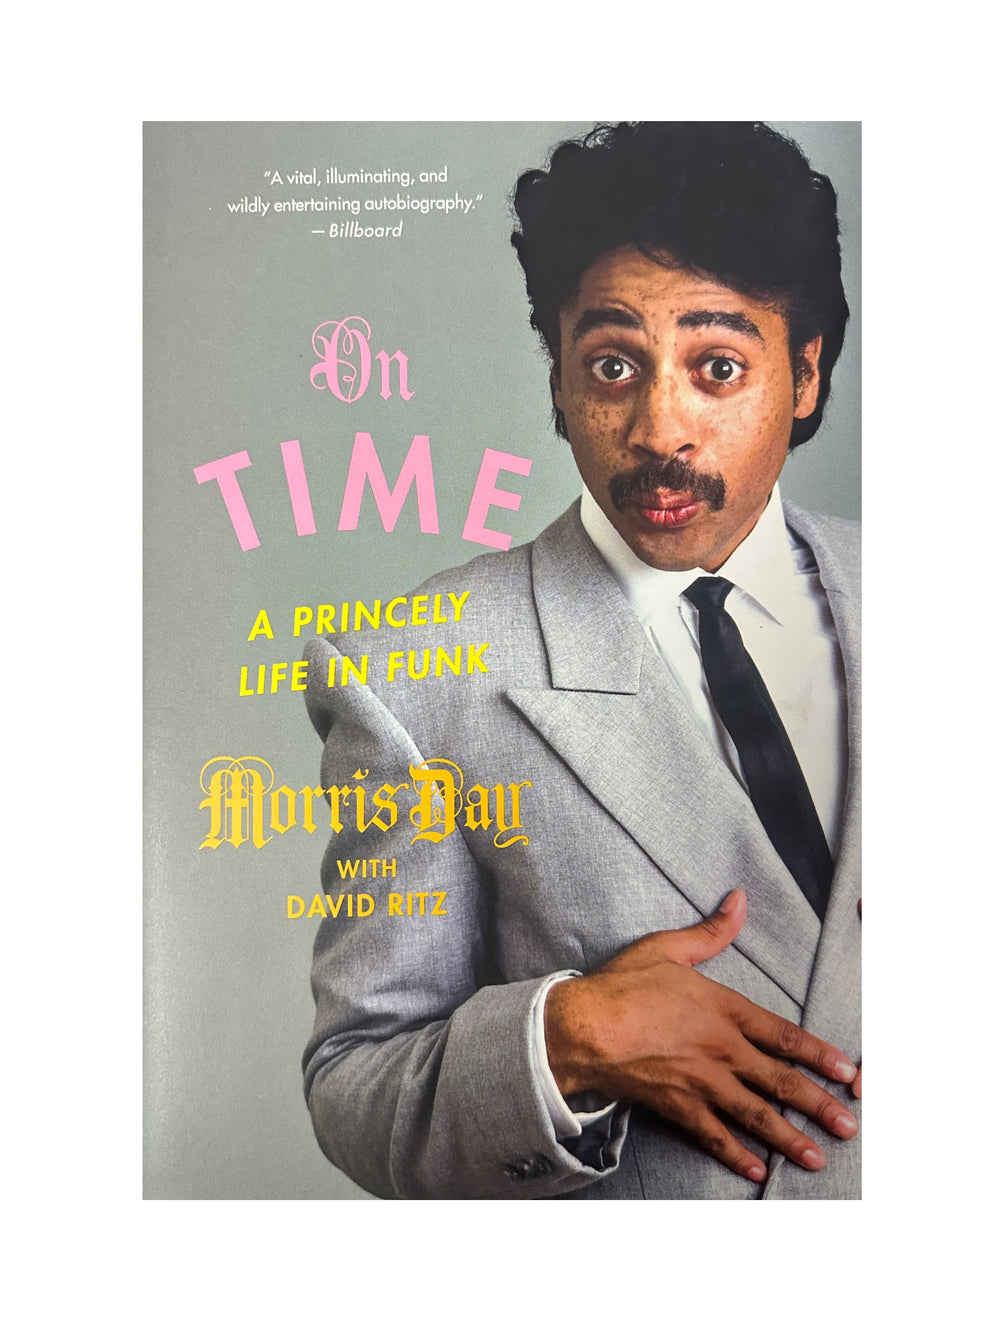 Prince – Morris Day On Time A Life In Funk Softback Book 224 Pages NEW:2020